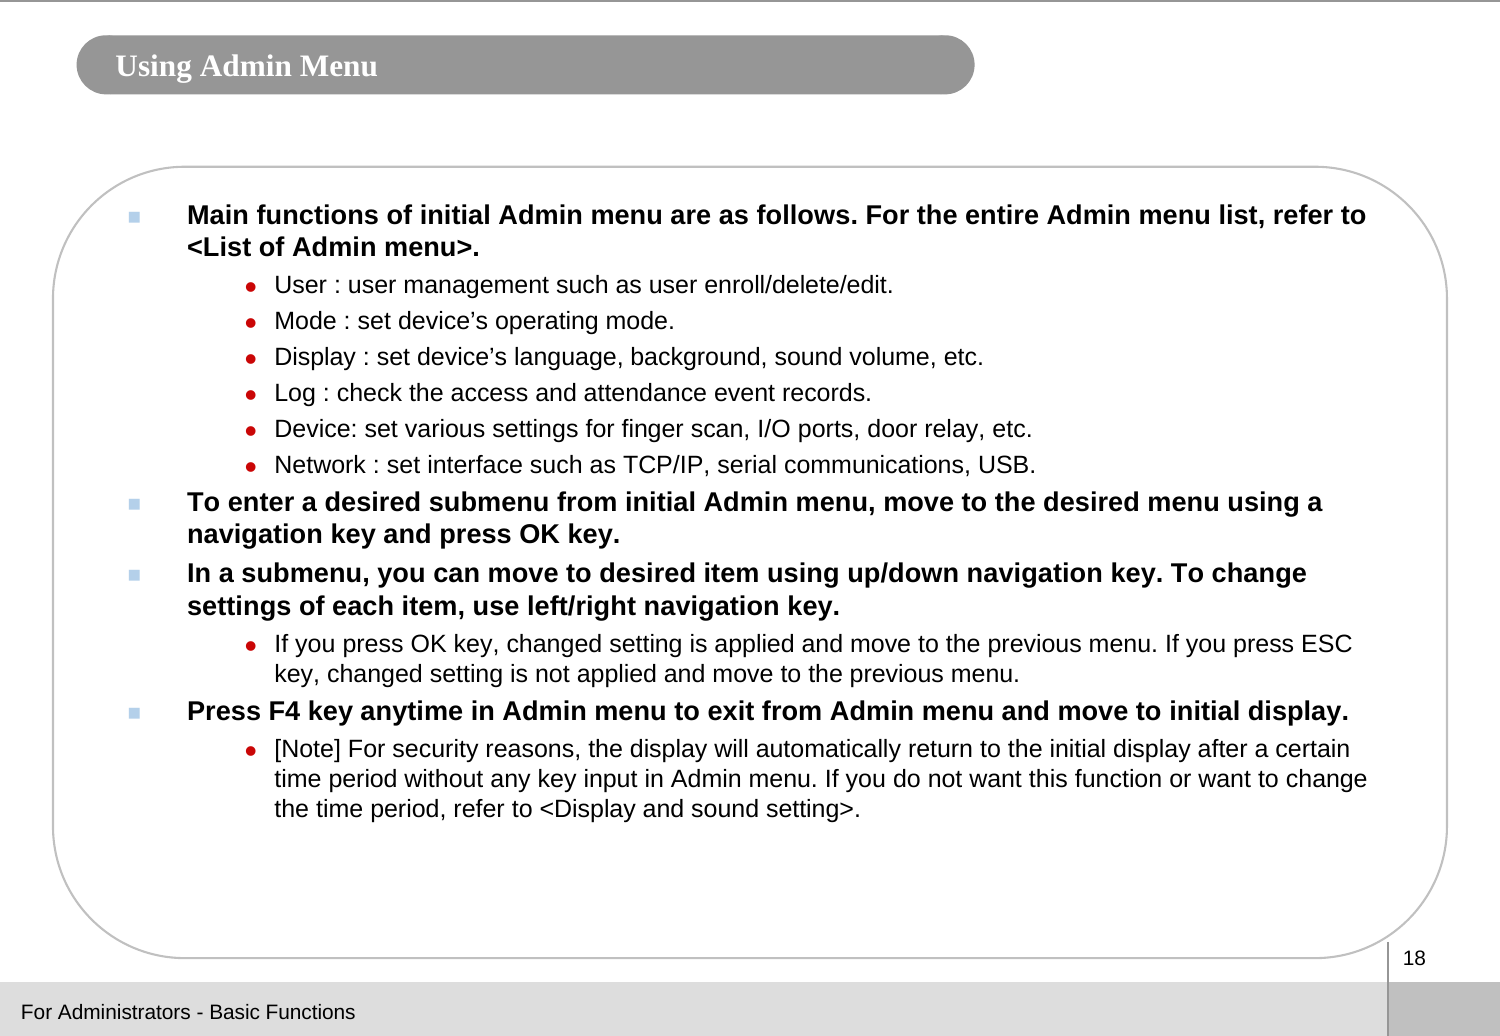 18Using Admin MenuMain functions of initial Admin menu are as follows. For the entire Admin menu list, refer to &lt;List of Admin menu&gt;.zUser : user management such as user enroll/delete/edit.zMode : set device’s operating mode.zDisplay : set device’s language, background, sound volume, etc.zLog : check the access and attendance event records.zDevice: set various settings for finger scan, I/O ports, door relay, etc.zNetwork : set interface such as TCP/IP, serial communications, USB.To enter a desired submenu from initial Admin menu, move to the desired menu using a navigation key and press OK key. In a submenu, you can move to desired item using up/down navigation key. To change settings of each item, use left/right navigation key. zIf you press OK key, changed setting is applied and move to the previous menu. If you press ESC key, changed setting is not applied and move to the previous menu. Press F4 key anytime in Admin menu to exit from Admin menu and move to initial display.z[Note] For security reasons, the display will automatically return to the initial display after a certain time period without any key input in Admin menu. If you do not want this function or want to change the time period, refer to &lt;Display and sound setting&gt;.For Administrators - Basic Functions